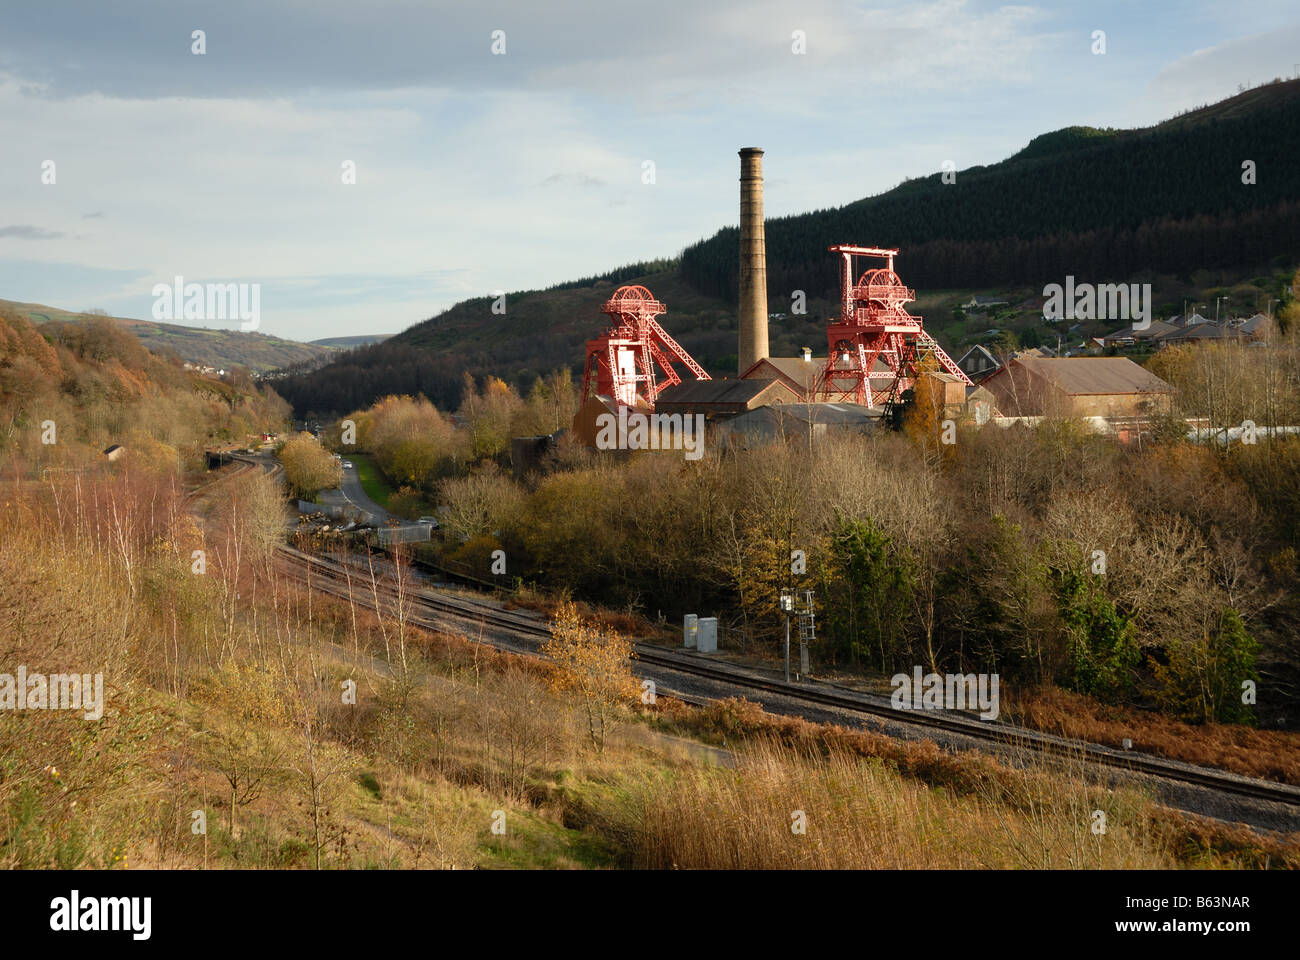 The old coal mining works of Rhondda Heritage Park Stock Photo